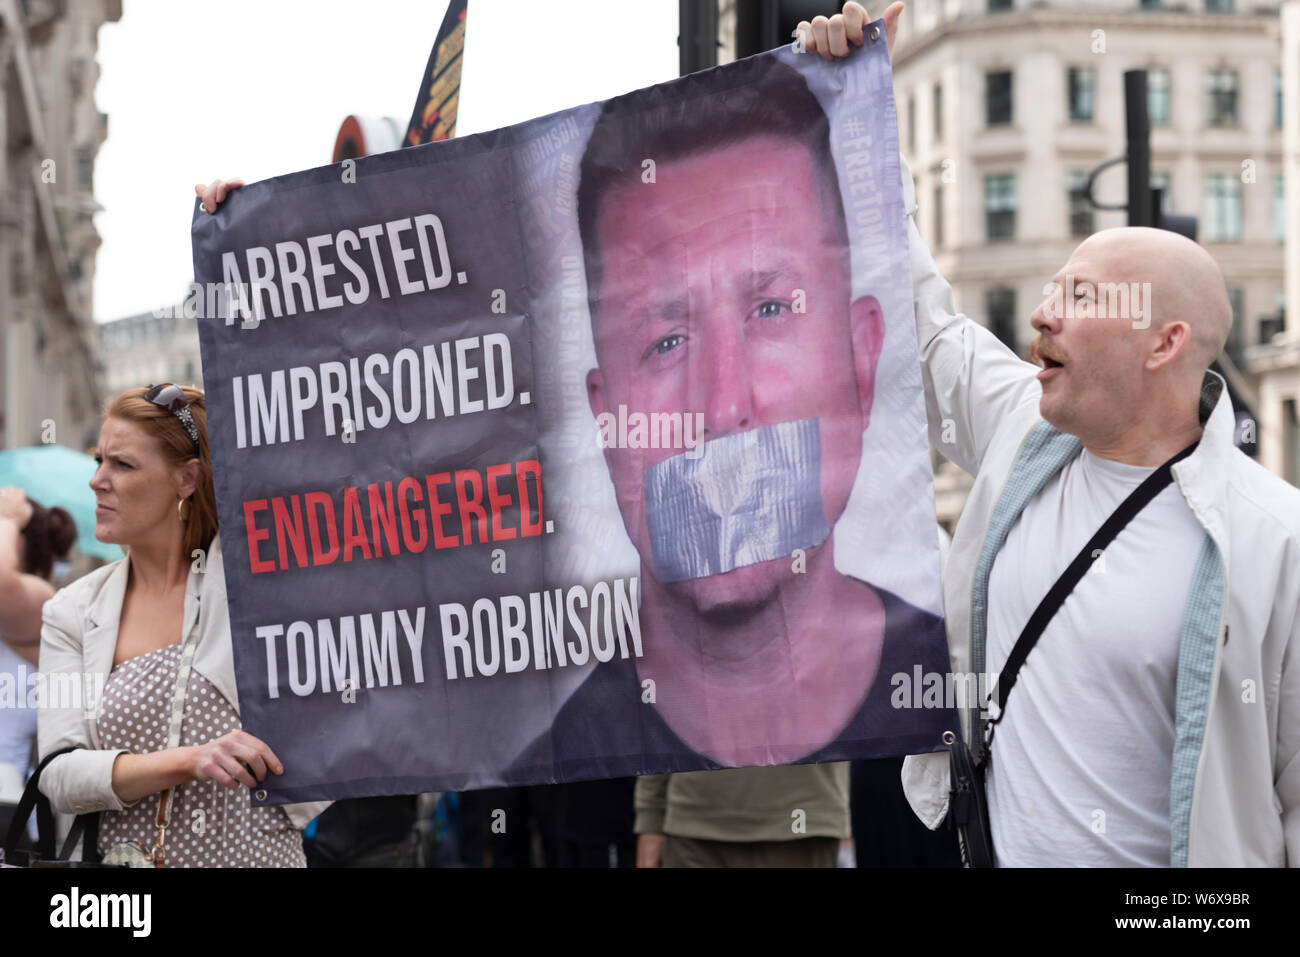 A rally is taking place in London protesting against the imprisonment of Stephen Yaxley-Lennon, who goes by the name of Tommy Robinson, and is serving a prison sentence in Belmarsh prison having been found guilty of contempt of court Stock Photo